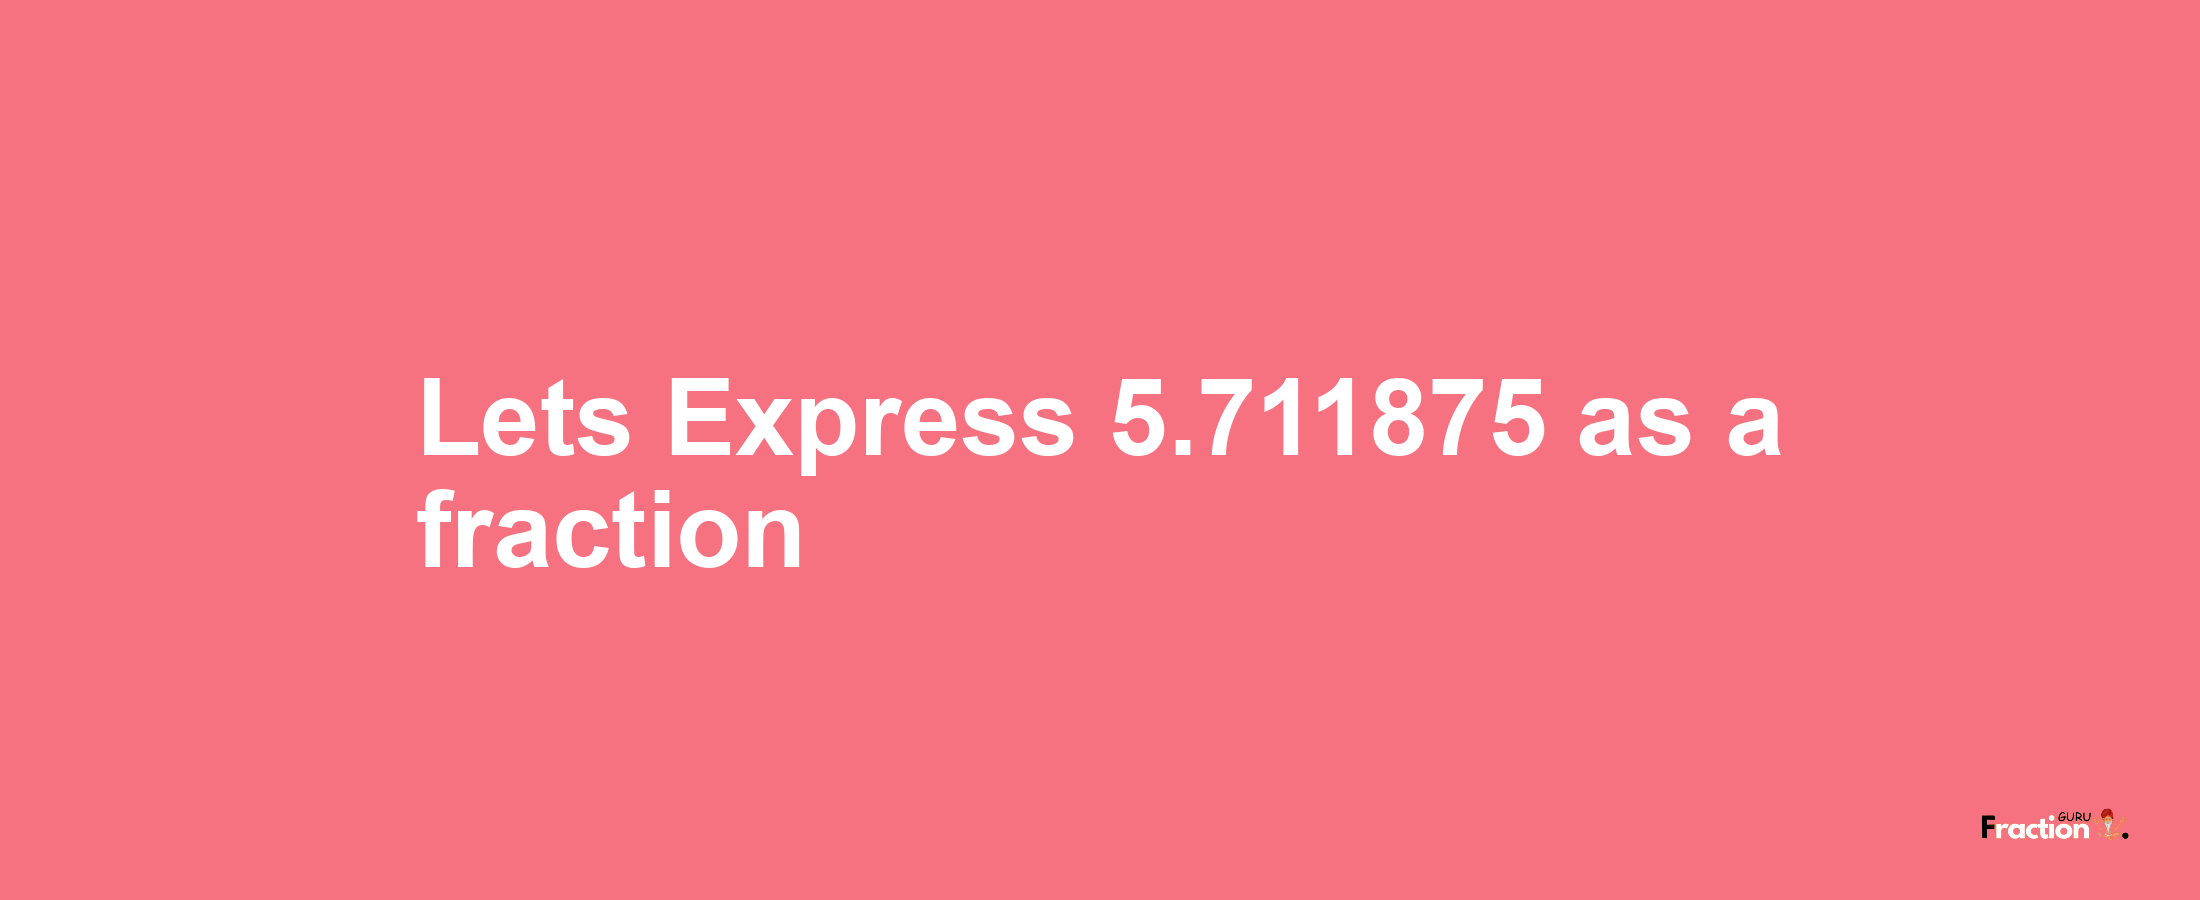 Lets Express 5.711875 as afraction